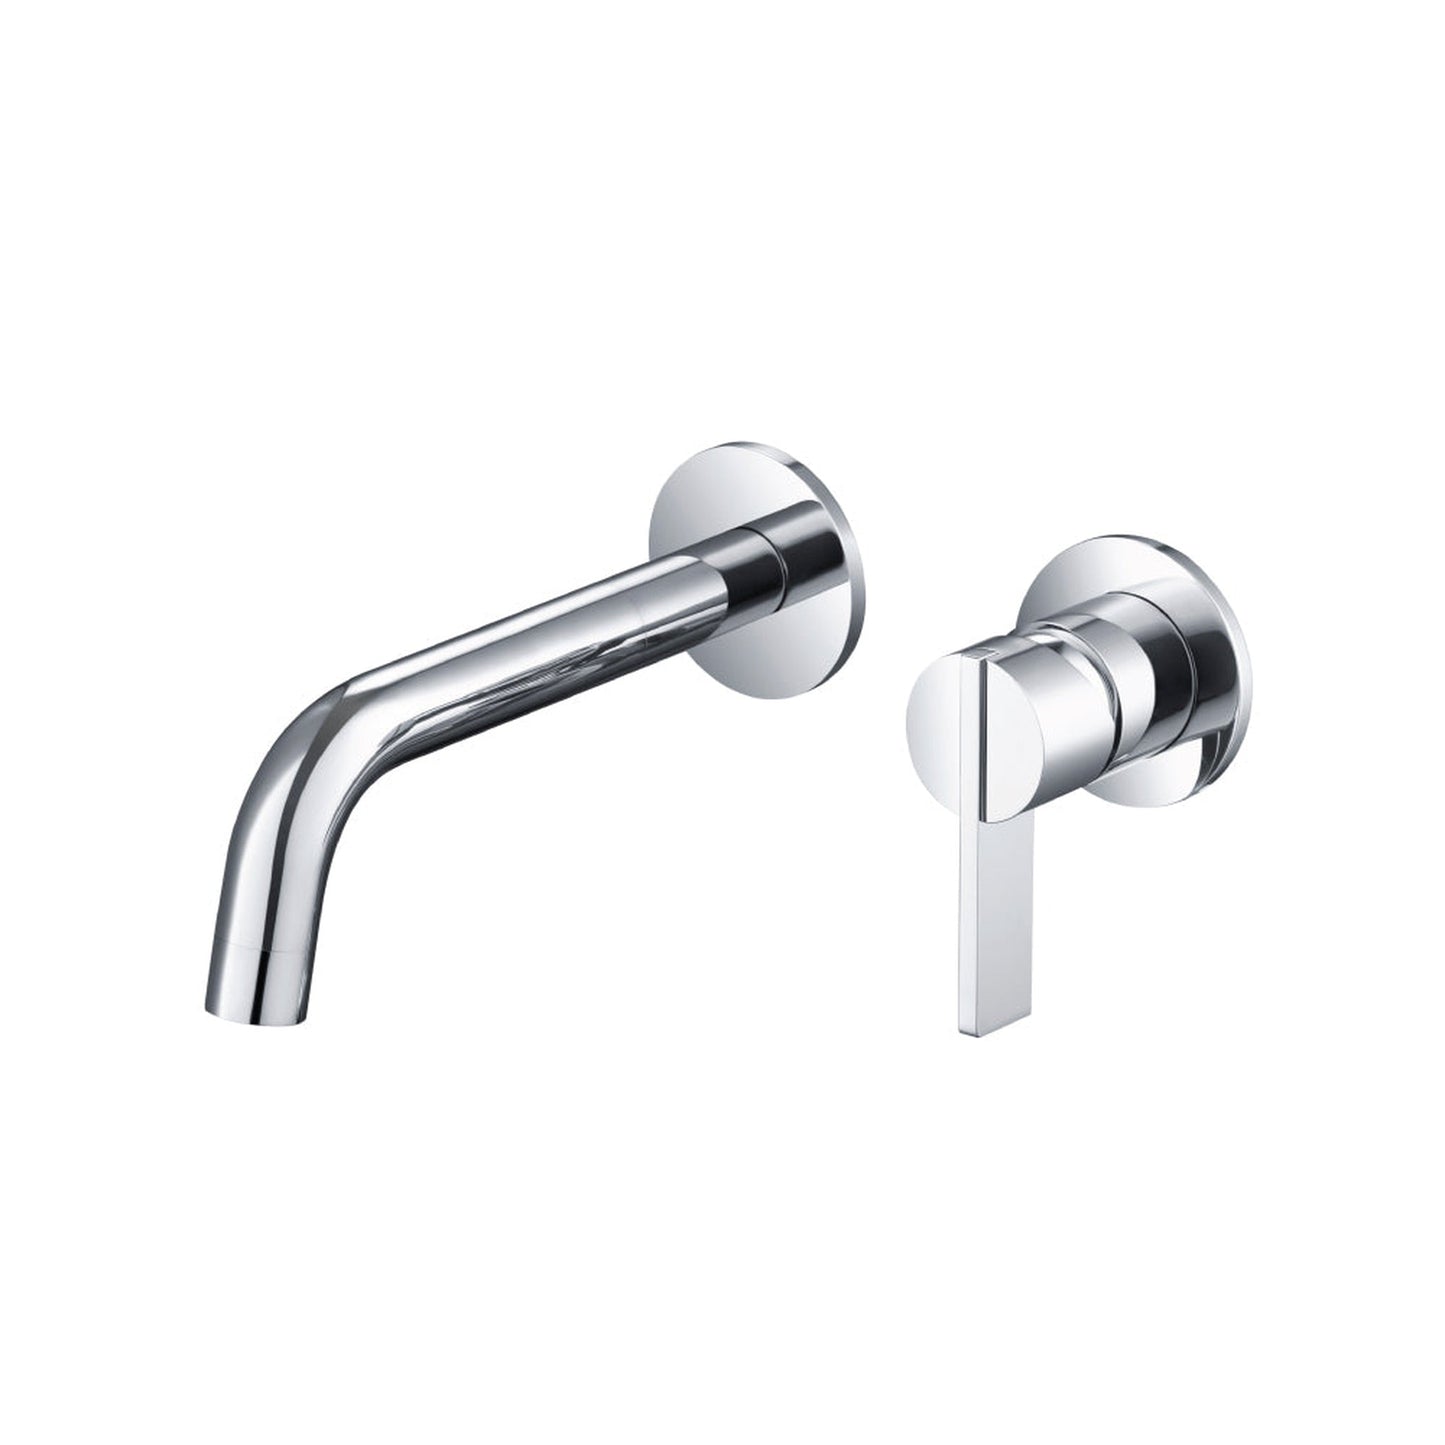 Isenberg Serie 145 4" Two-Hole Chrome Wall-Mounted Bathroom Sink Faucet With Rough-In Valve